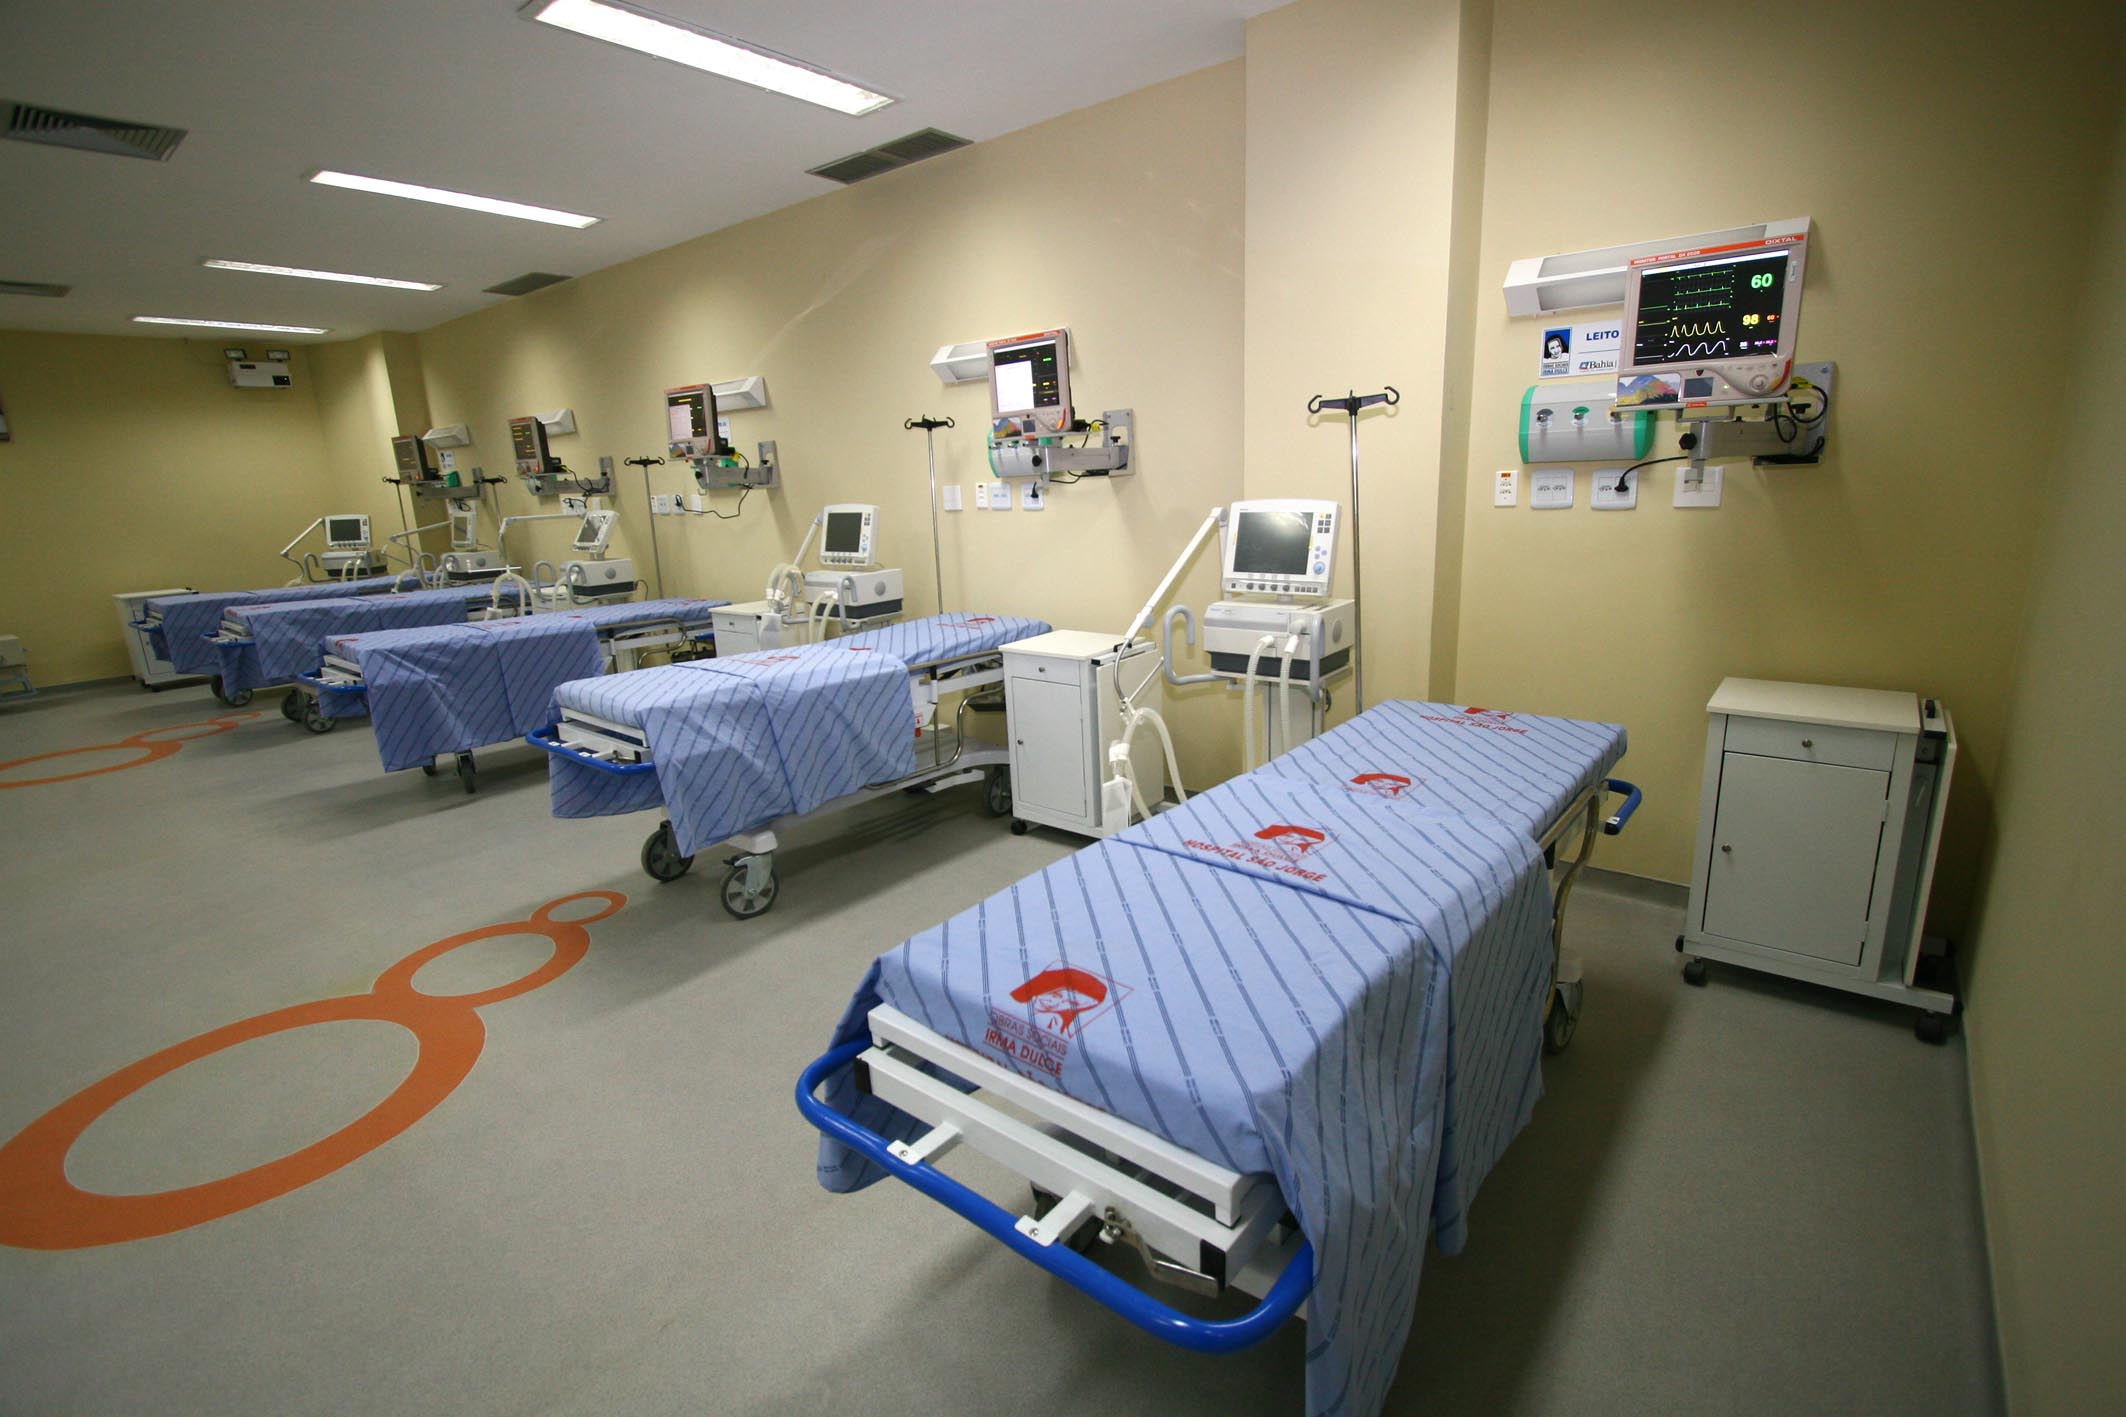 a medical room is shown with carts and monitors